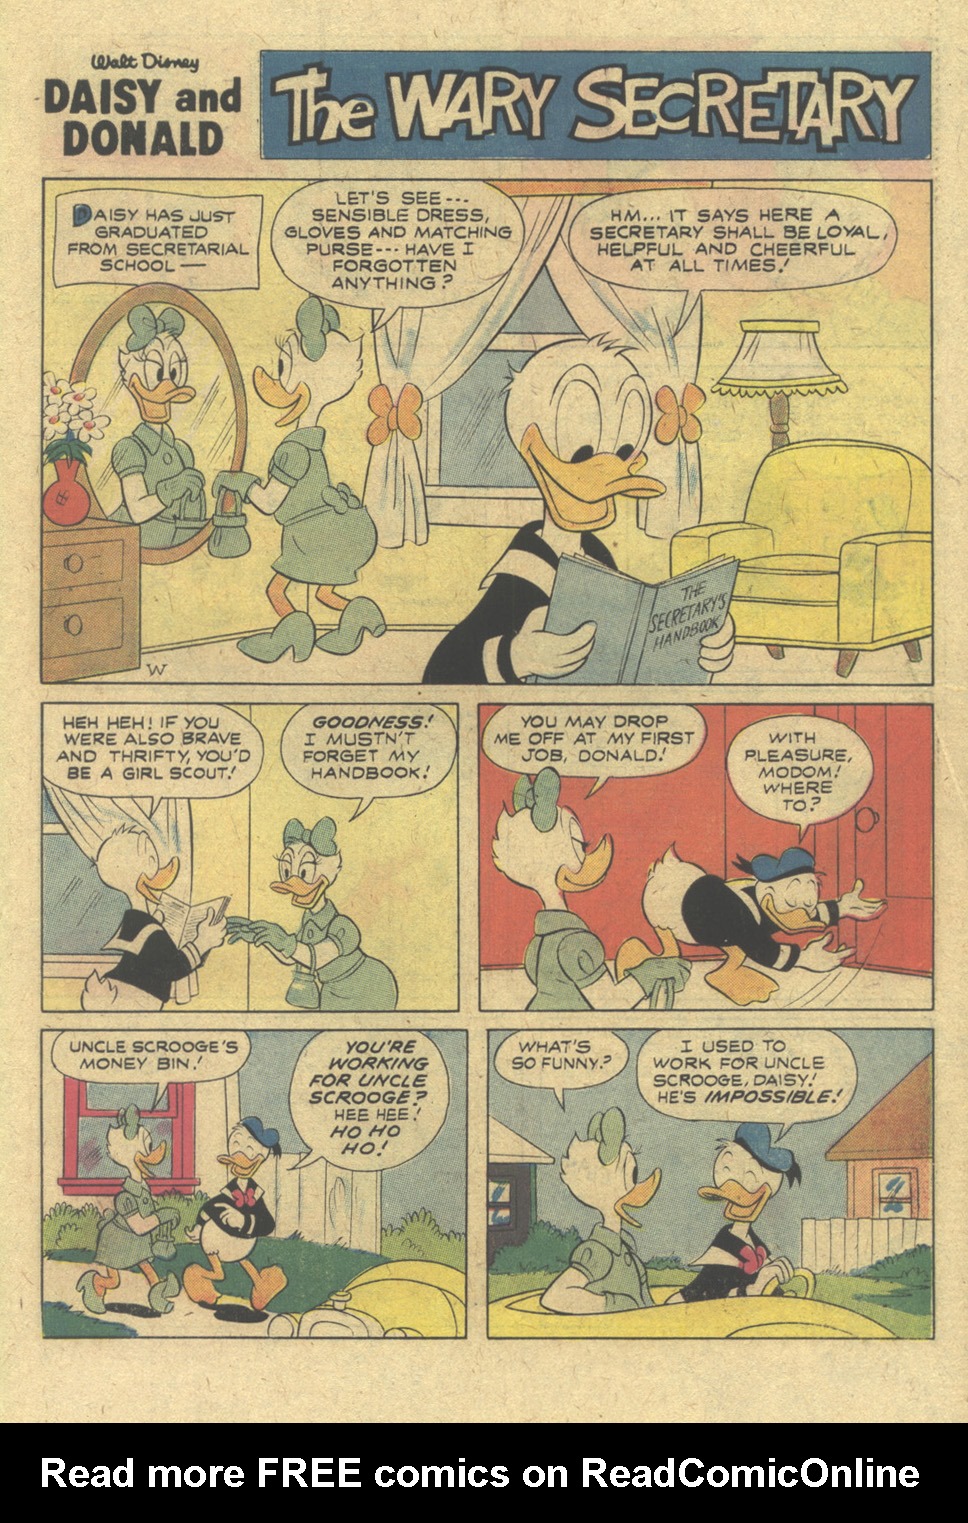 Read online Walt Disney Daisy and Donald comic -  Issue #21 - 27